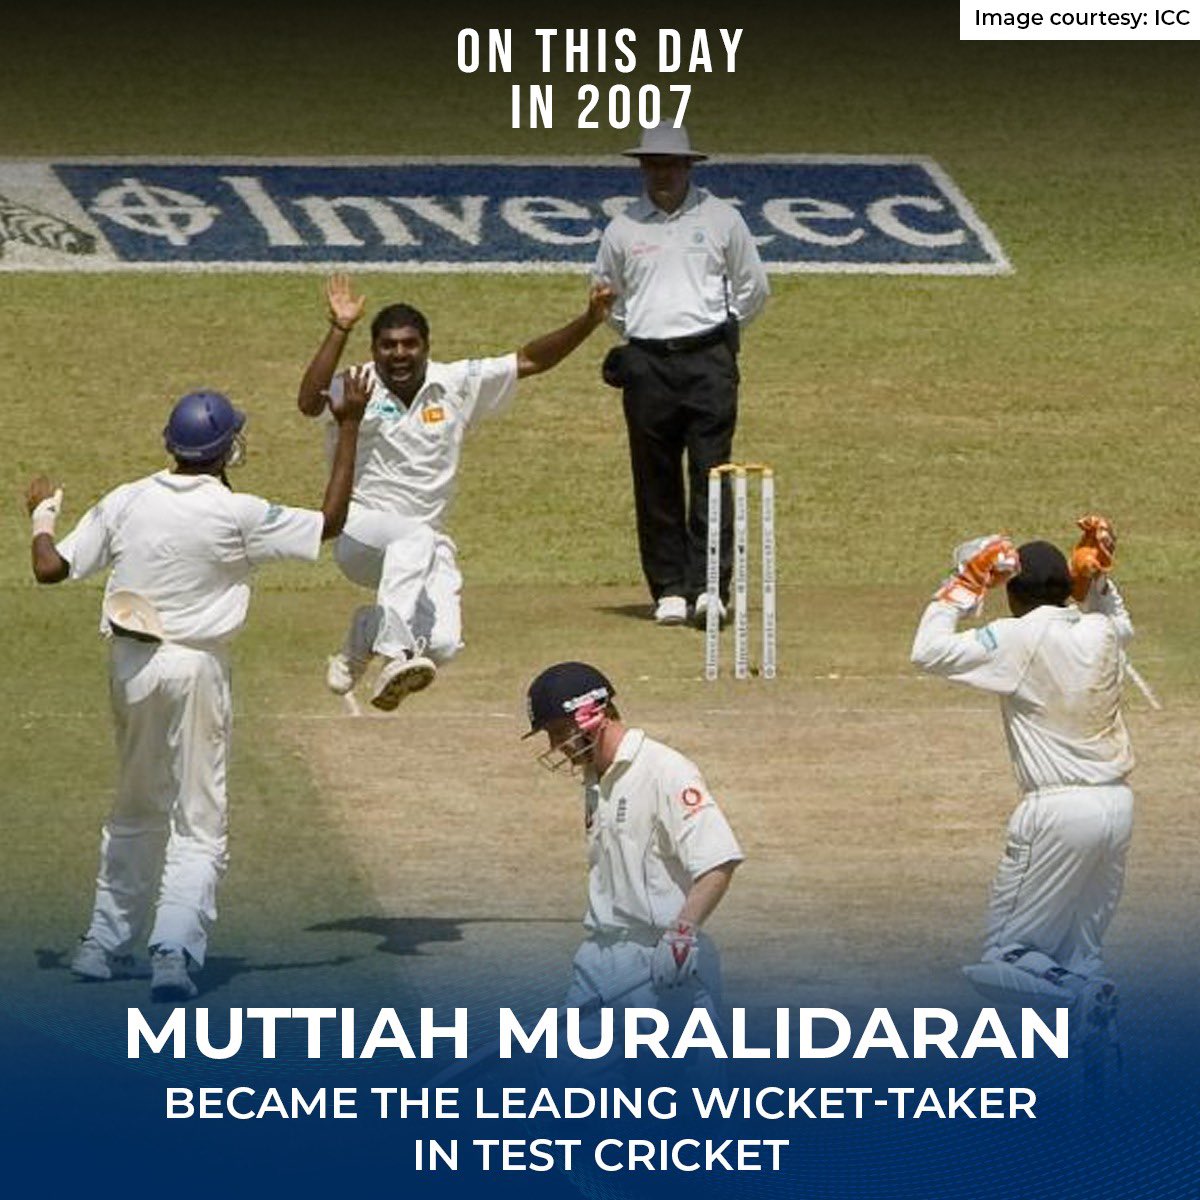 #OnThisDay Muttiah Muralidaran regained the record for becoming the highest wicket-taker in Test matches. His 709th scalp was England’s Paul Collingwood. #MuthiahMuralidaran #TestMatch #Wickets #Crickettwitter #SLvENG